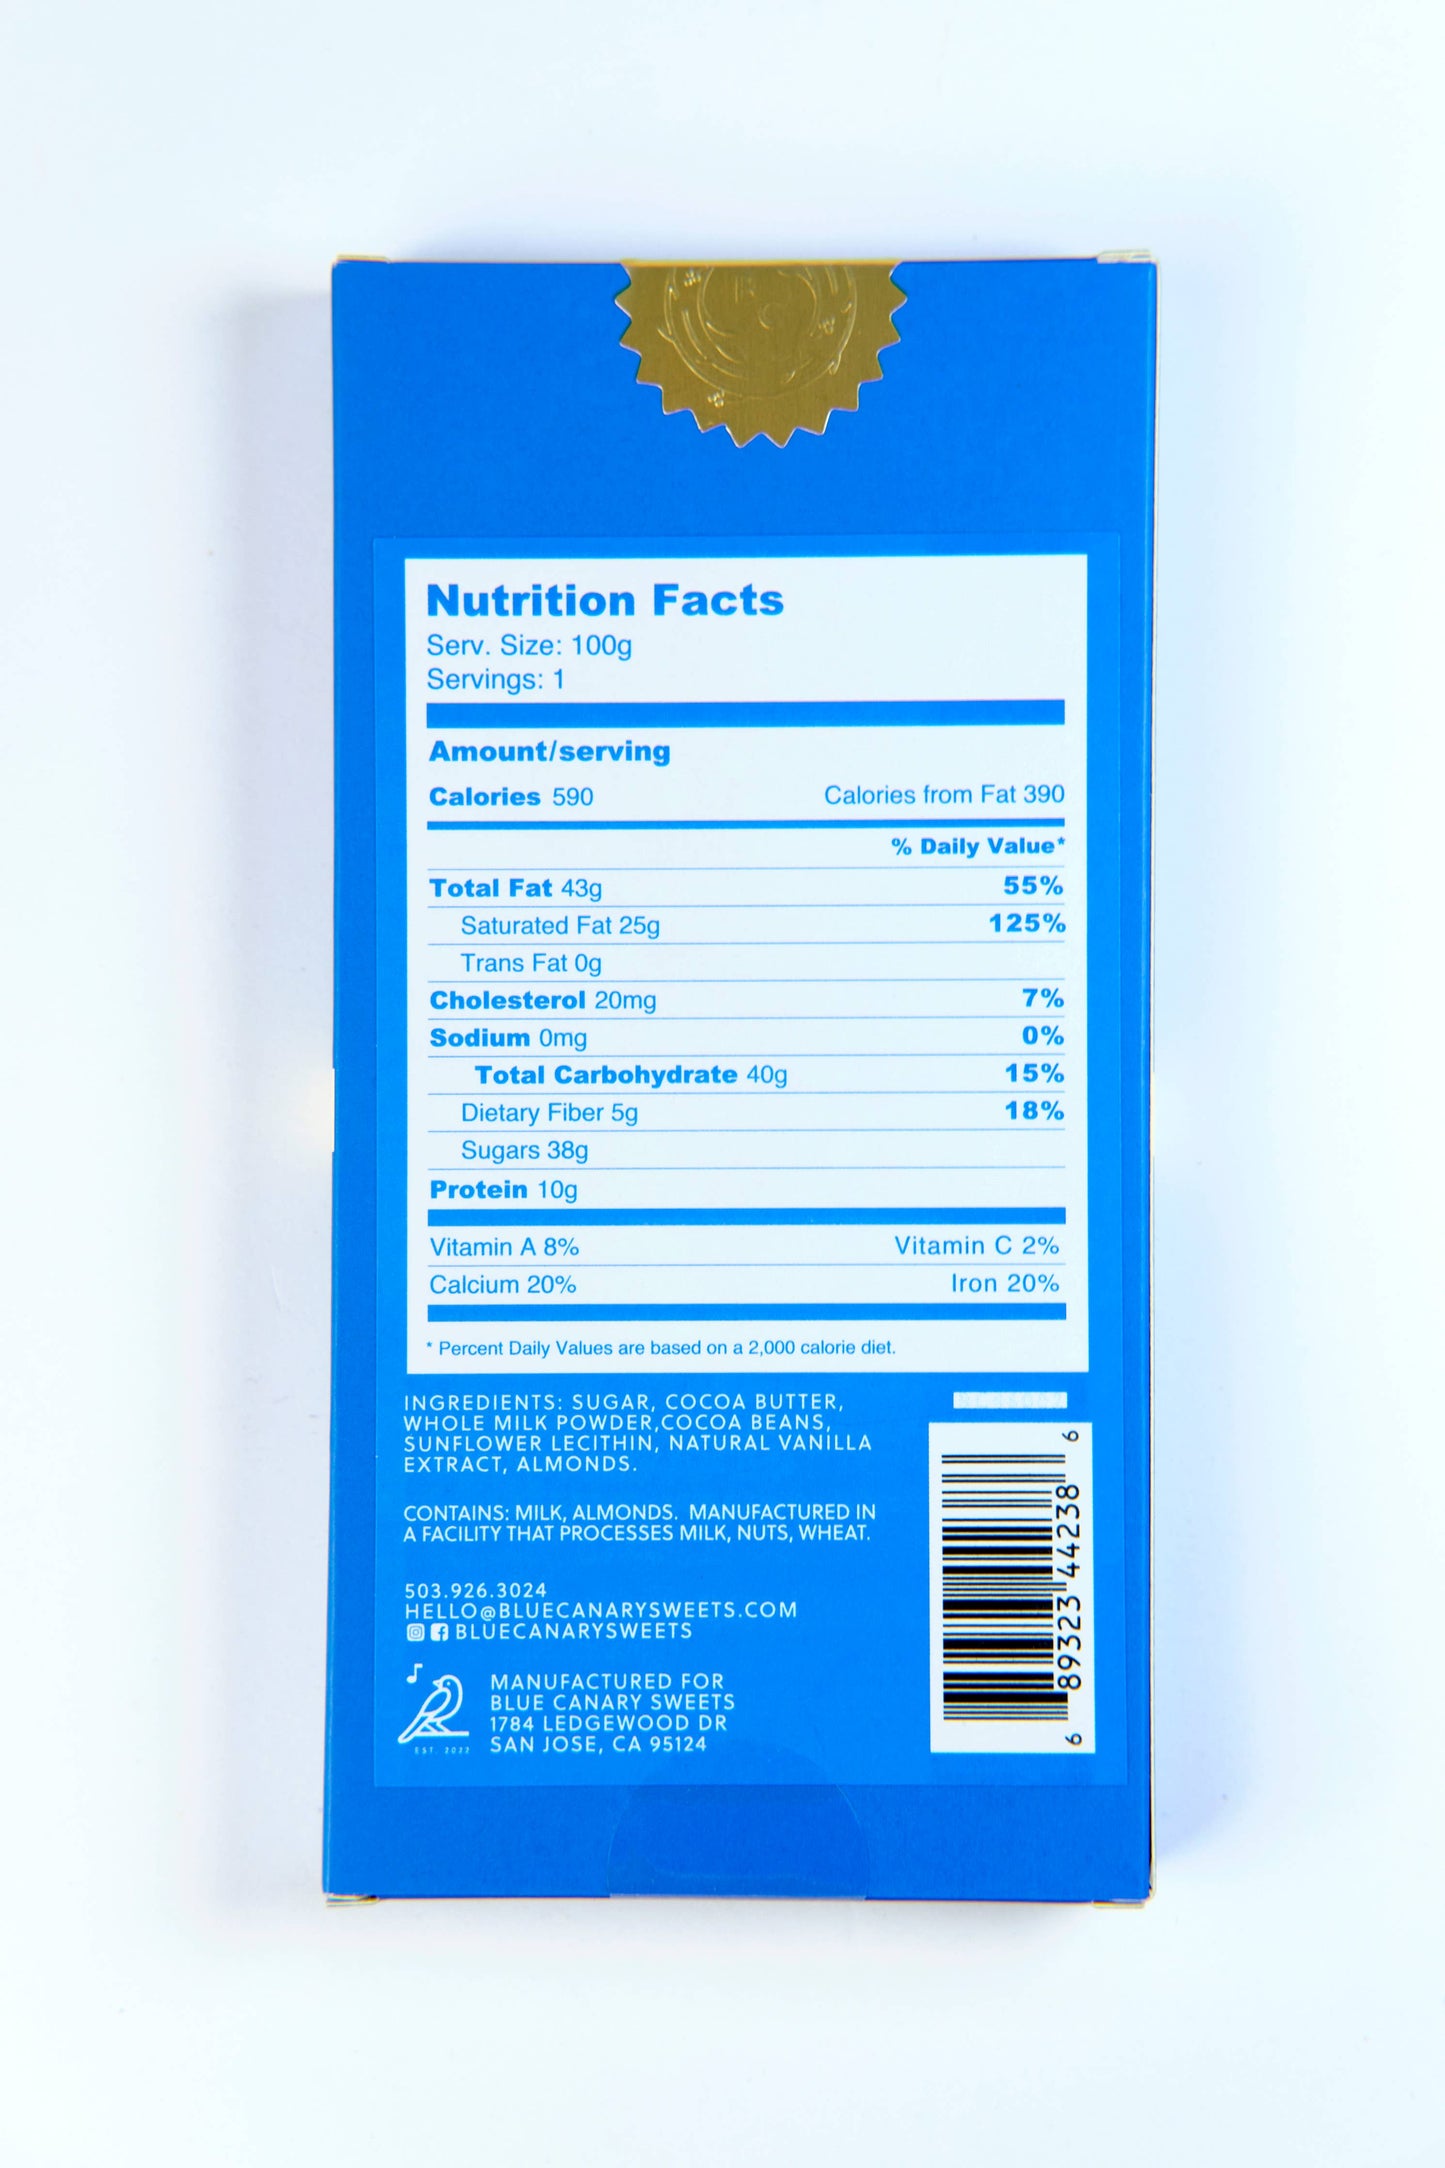 Milk Chocolate Bar with Toasted Almonds: Blue Canary Sweets 3.5oz